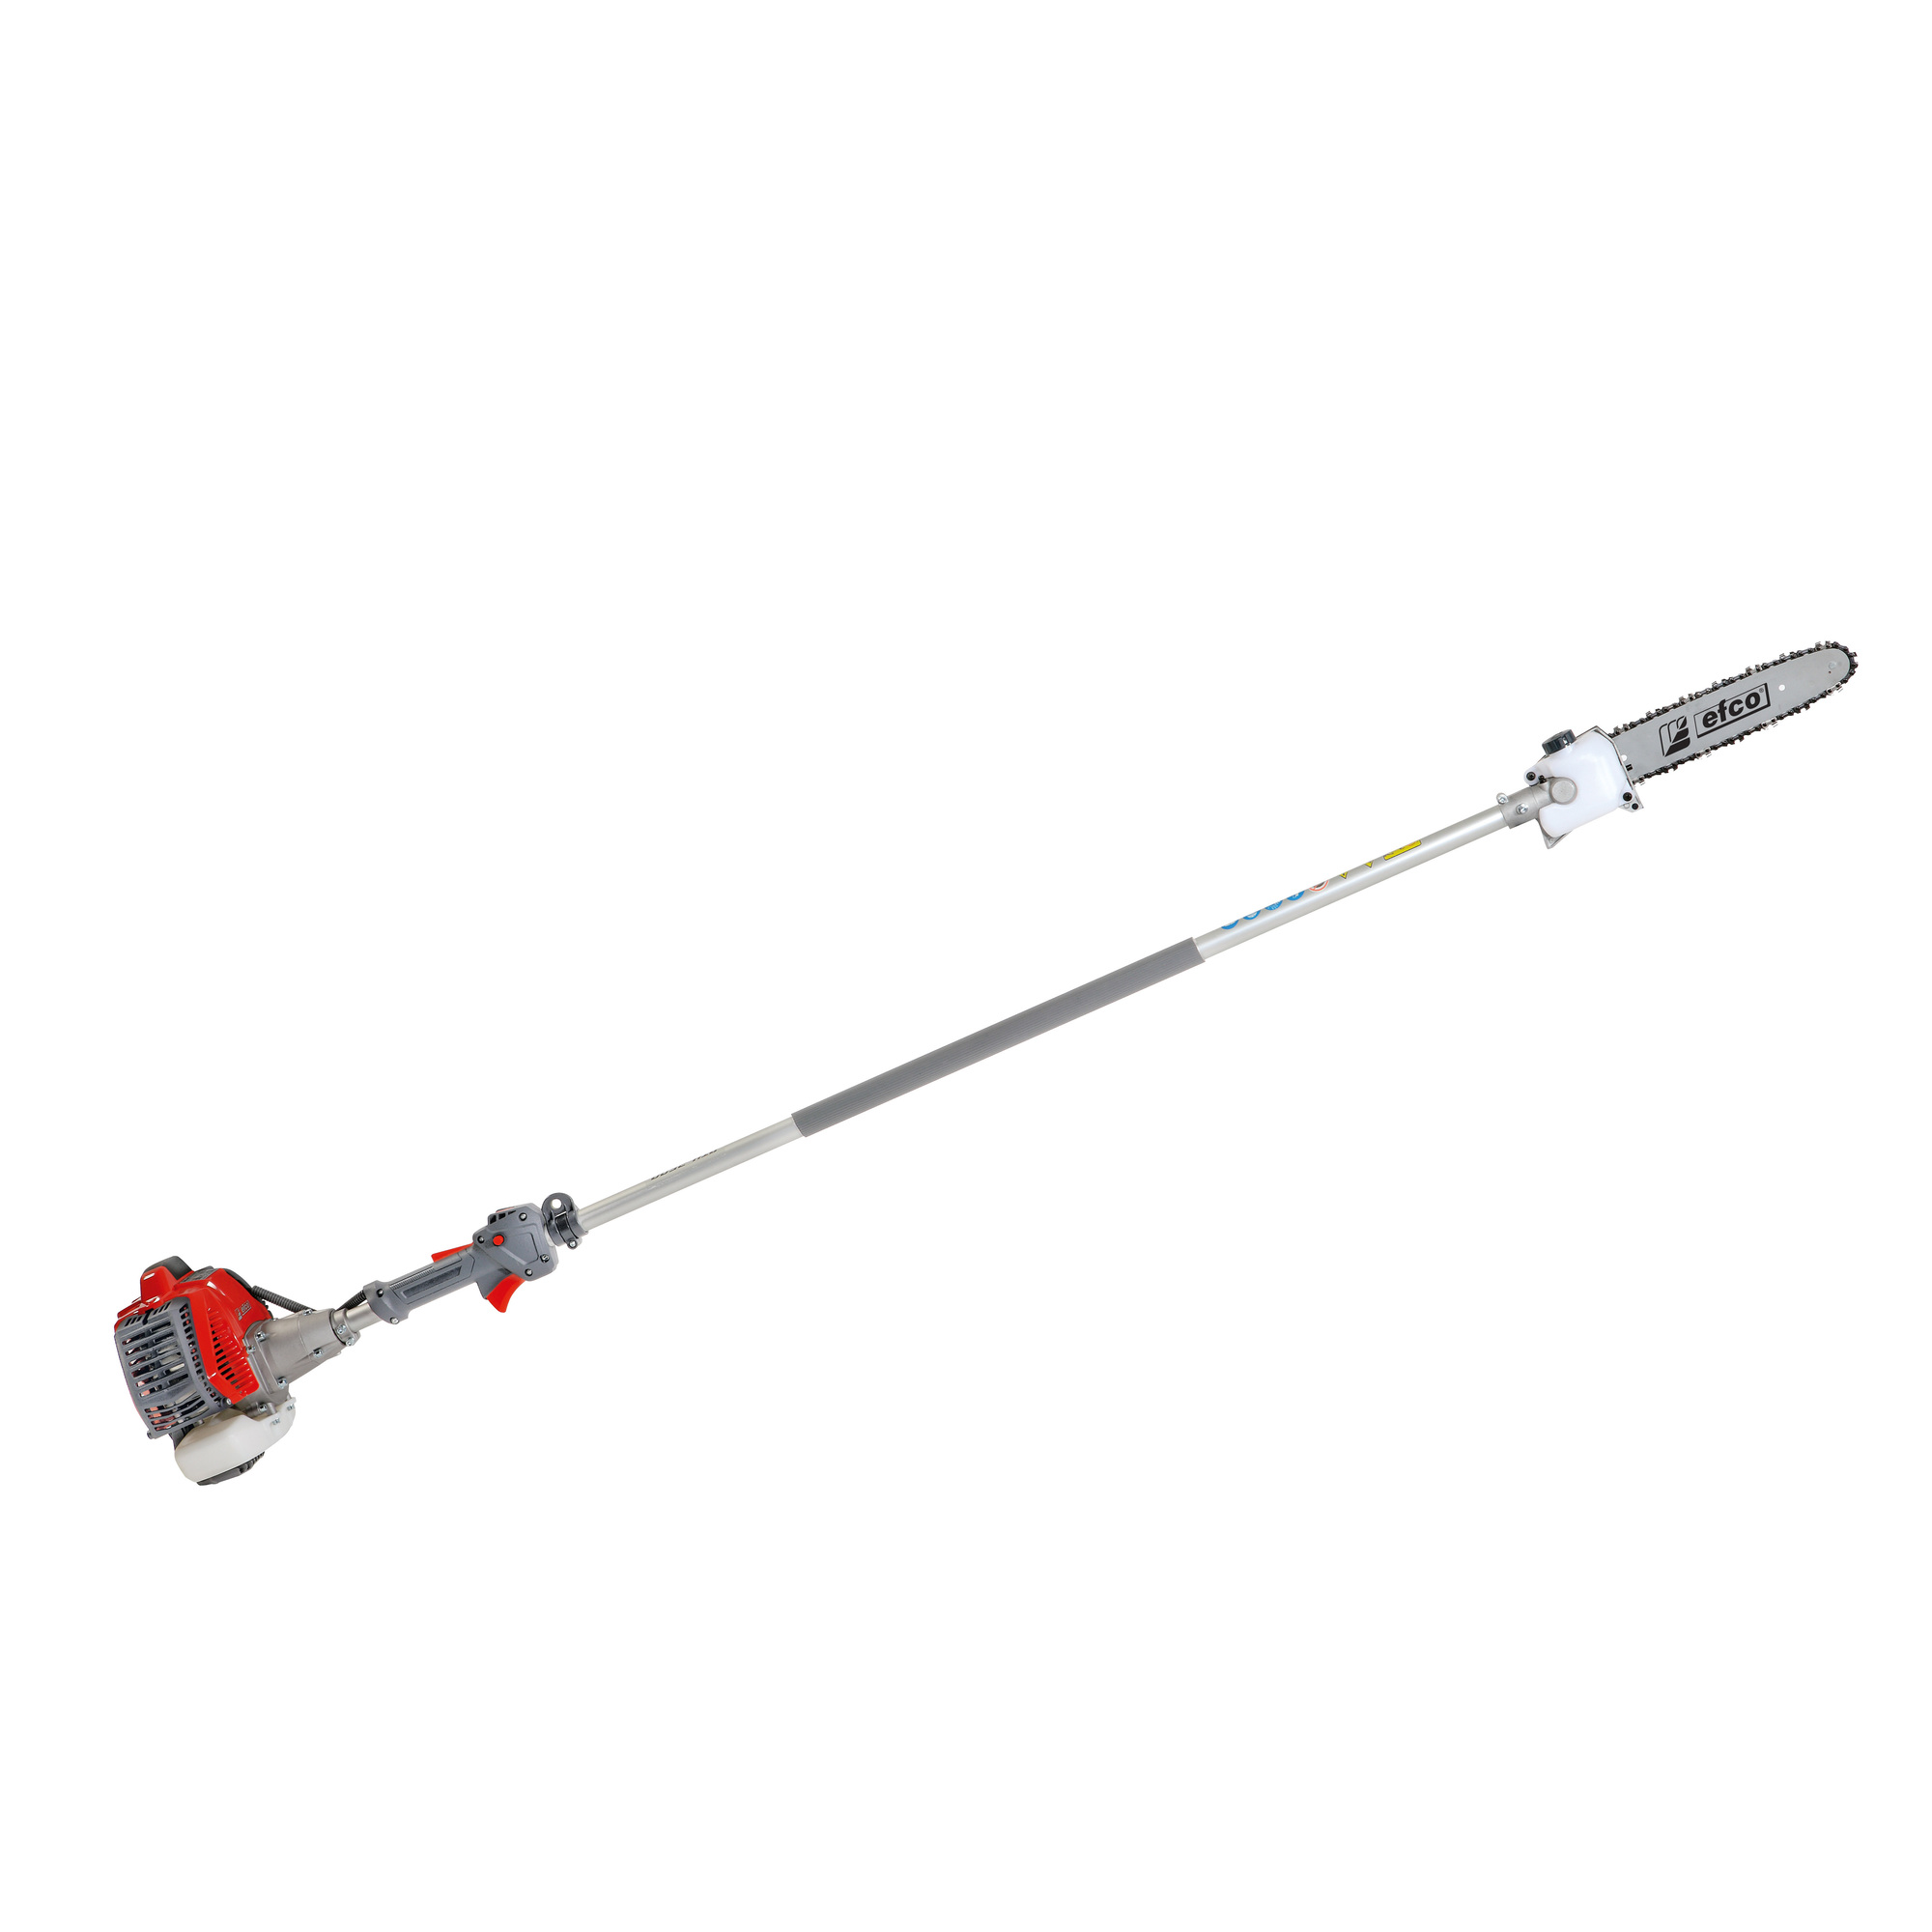 Efco, H Series Pole Saw Pruner 25.4cc, Bar Length 10 in, Operating Height 7.2 ft, Model PTH2500